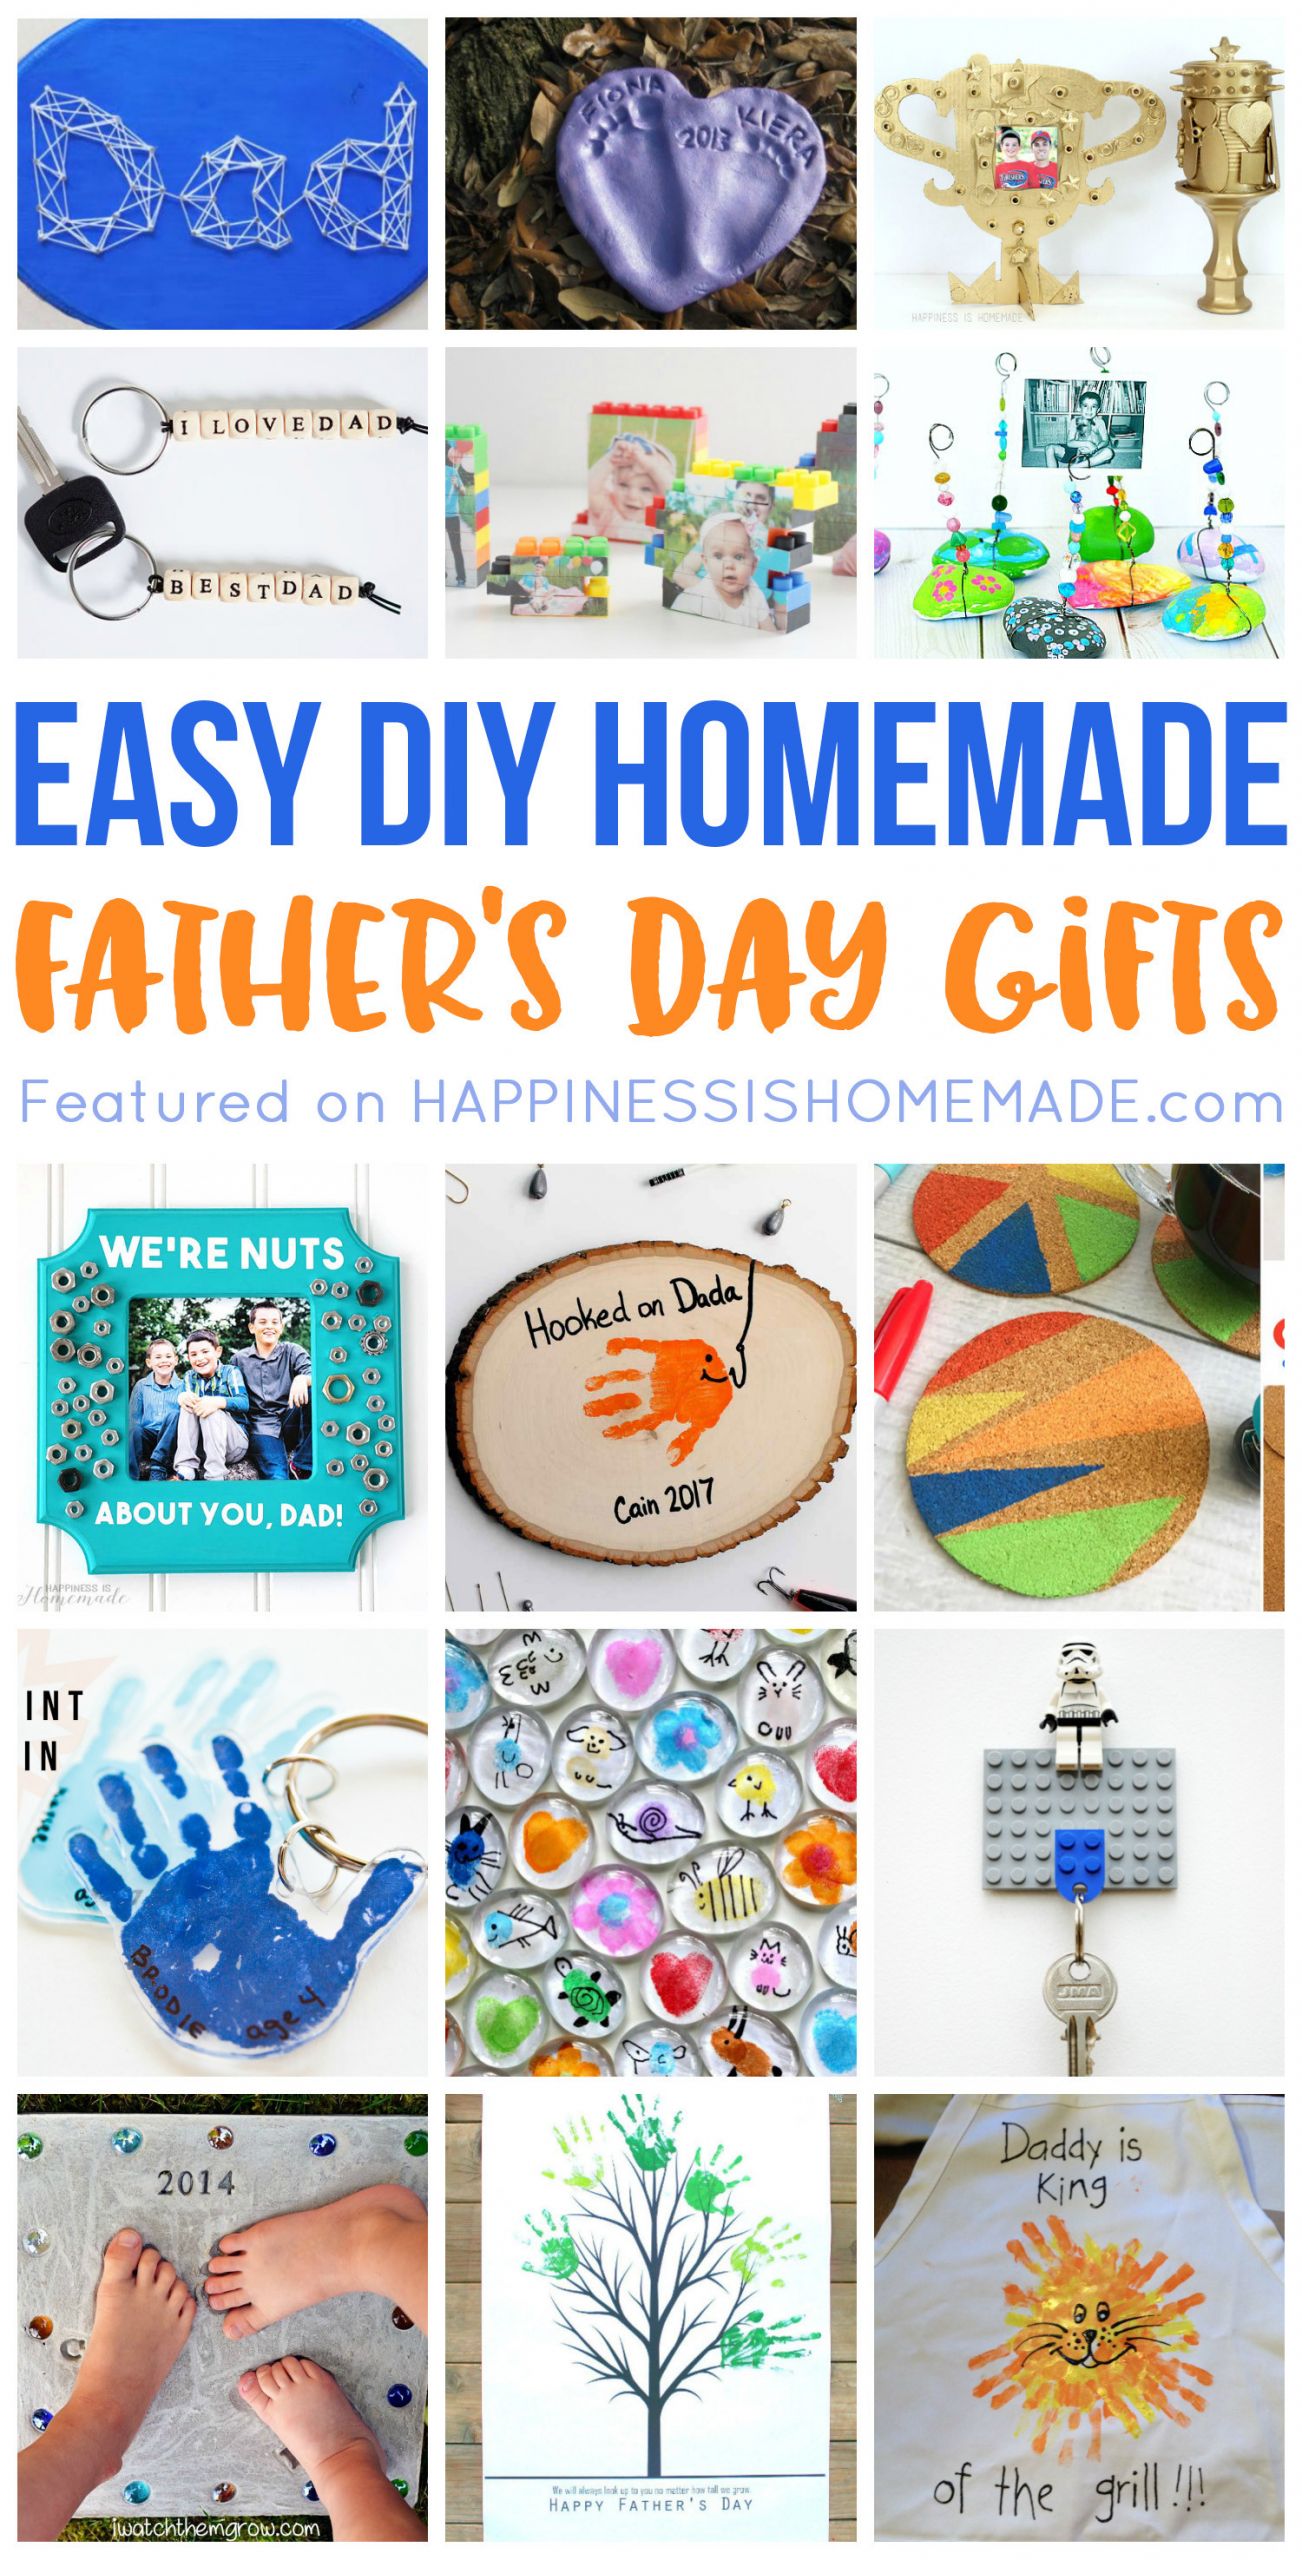 Homemade Fathers Day Gifts Ideas
 20 Homemade Father s Day Gifts That Kids Can Make